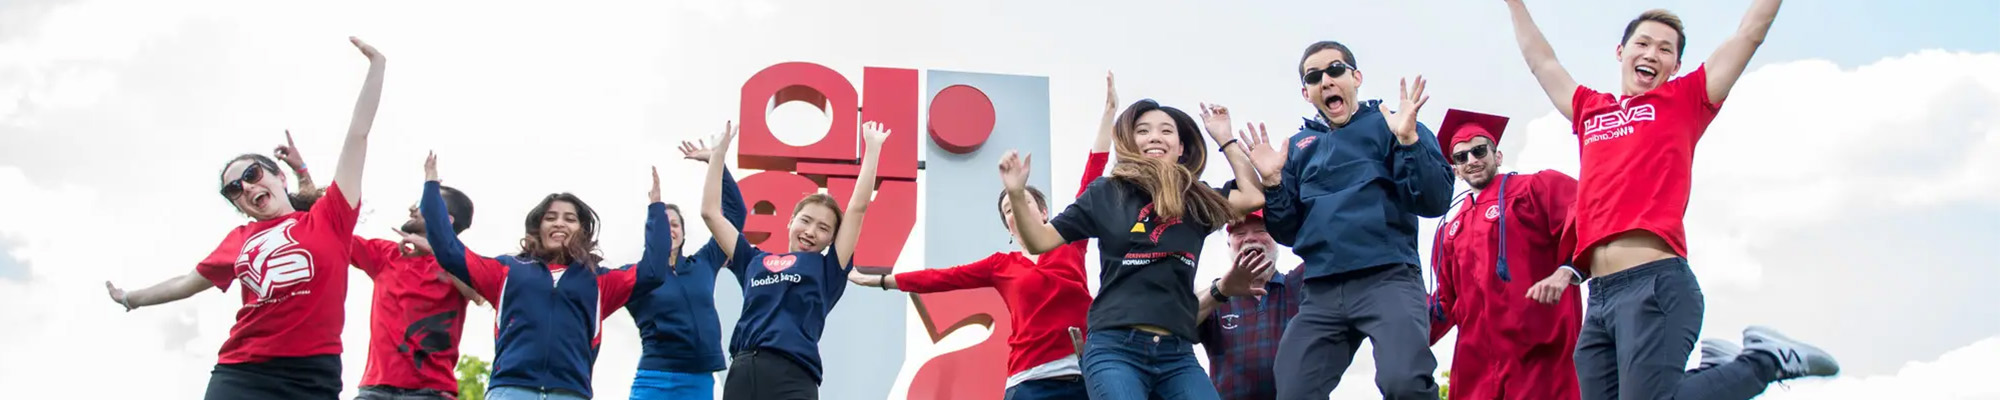 International students jumping into the air in front of I LOVE SVSU artwork